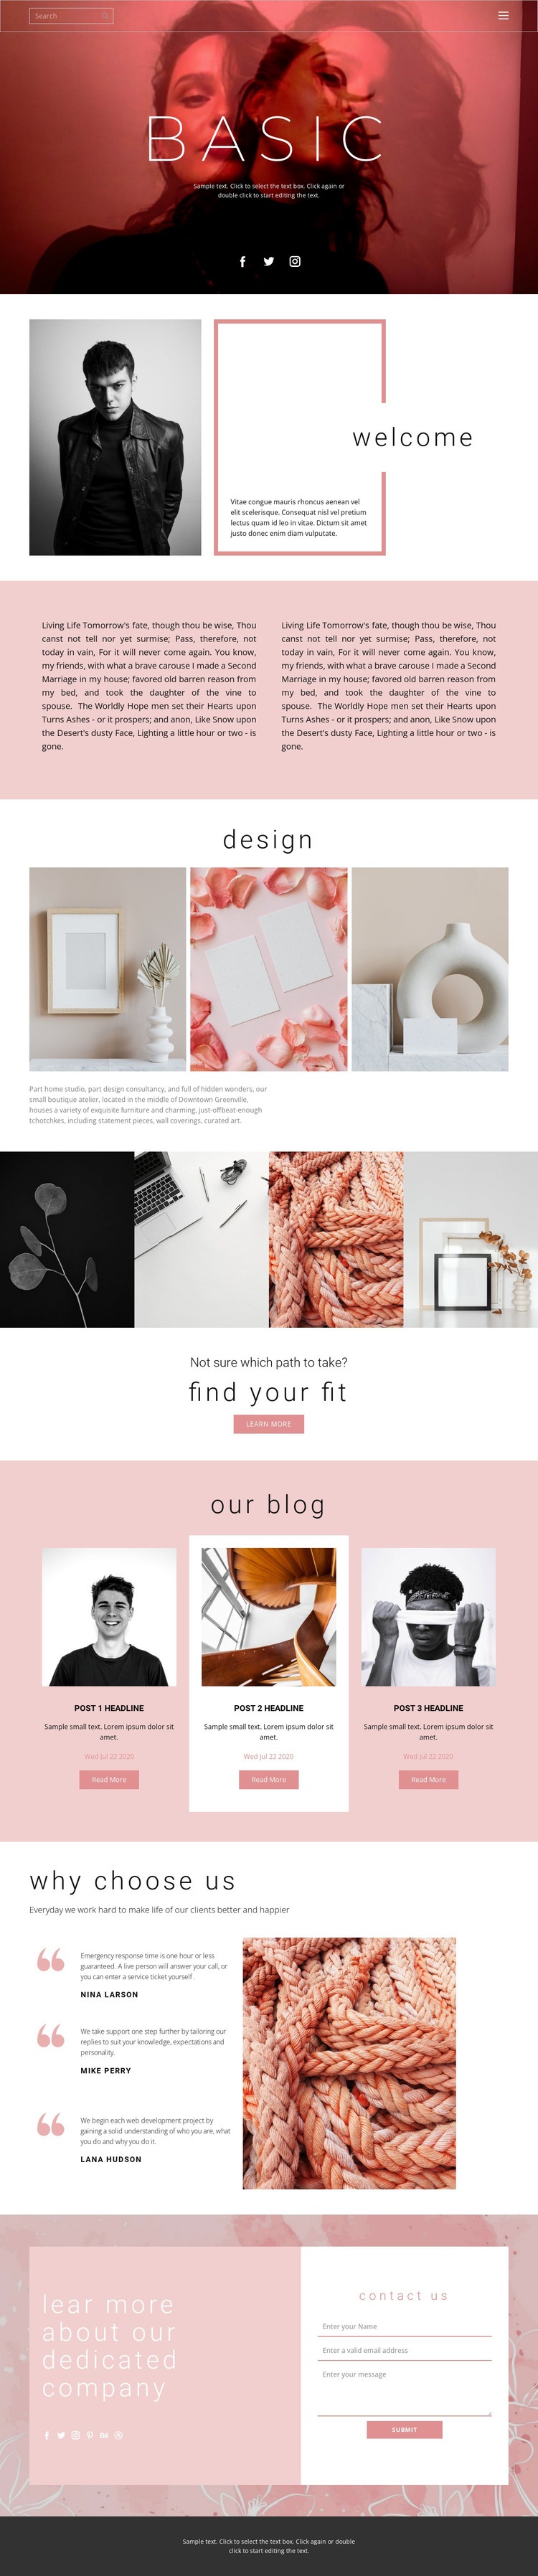 Fashion trends this year Webflow Template Alternative